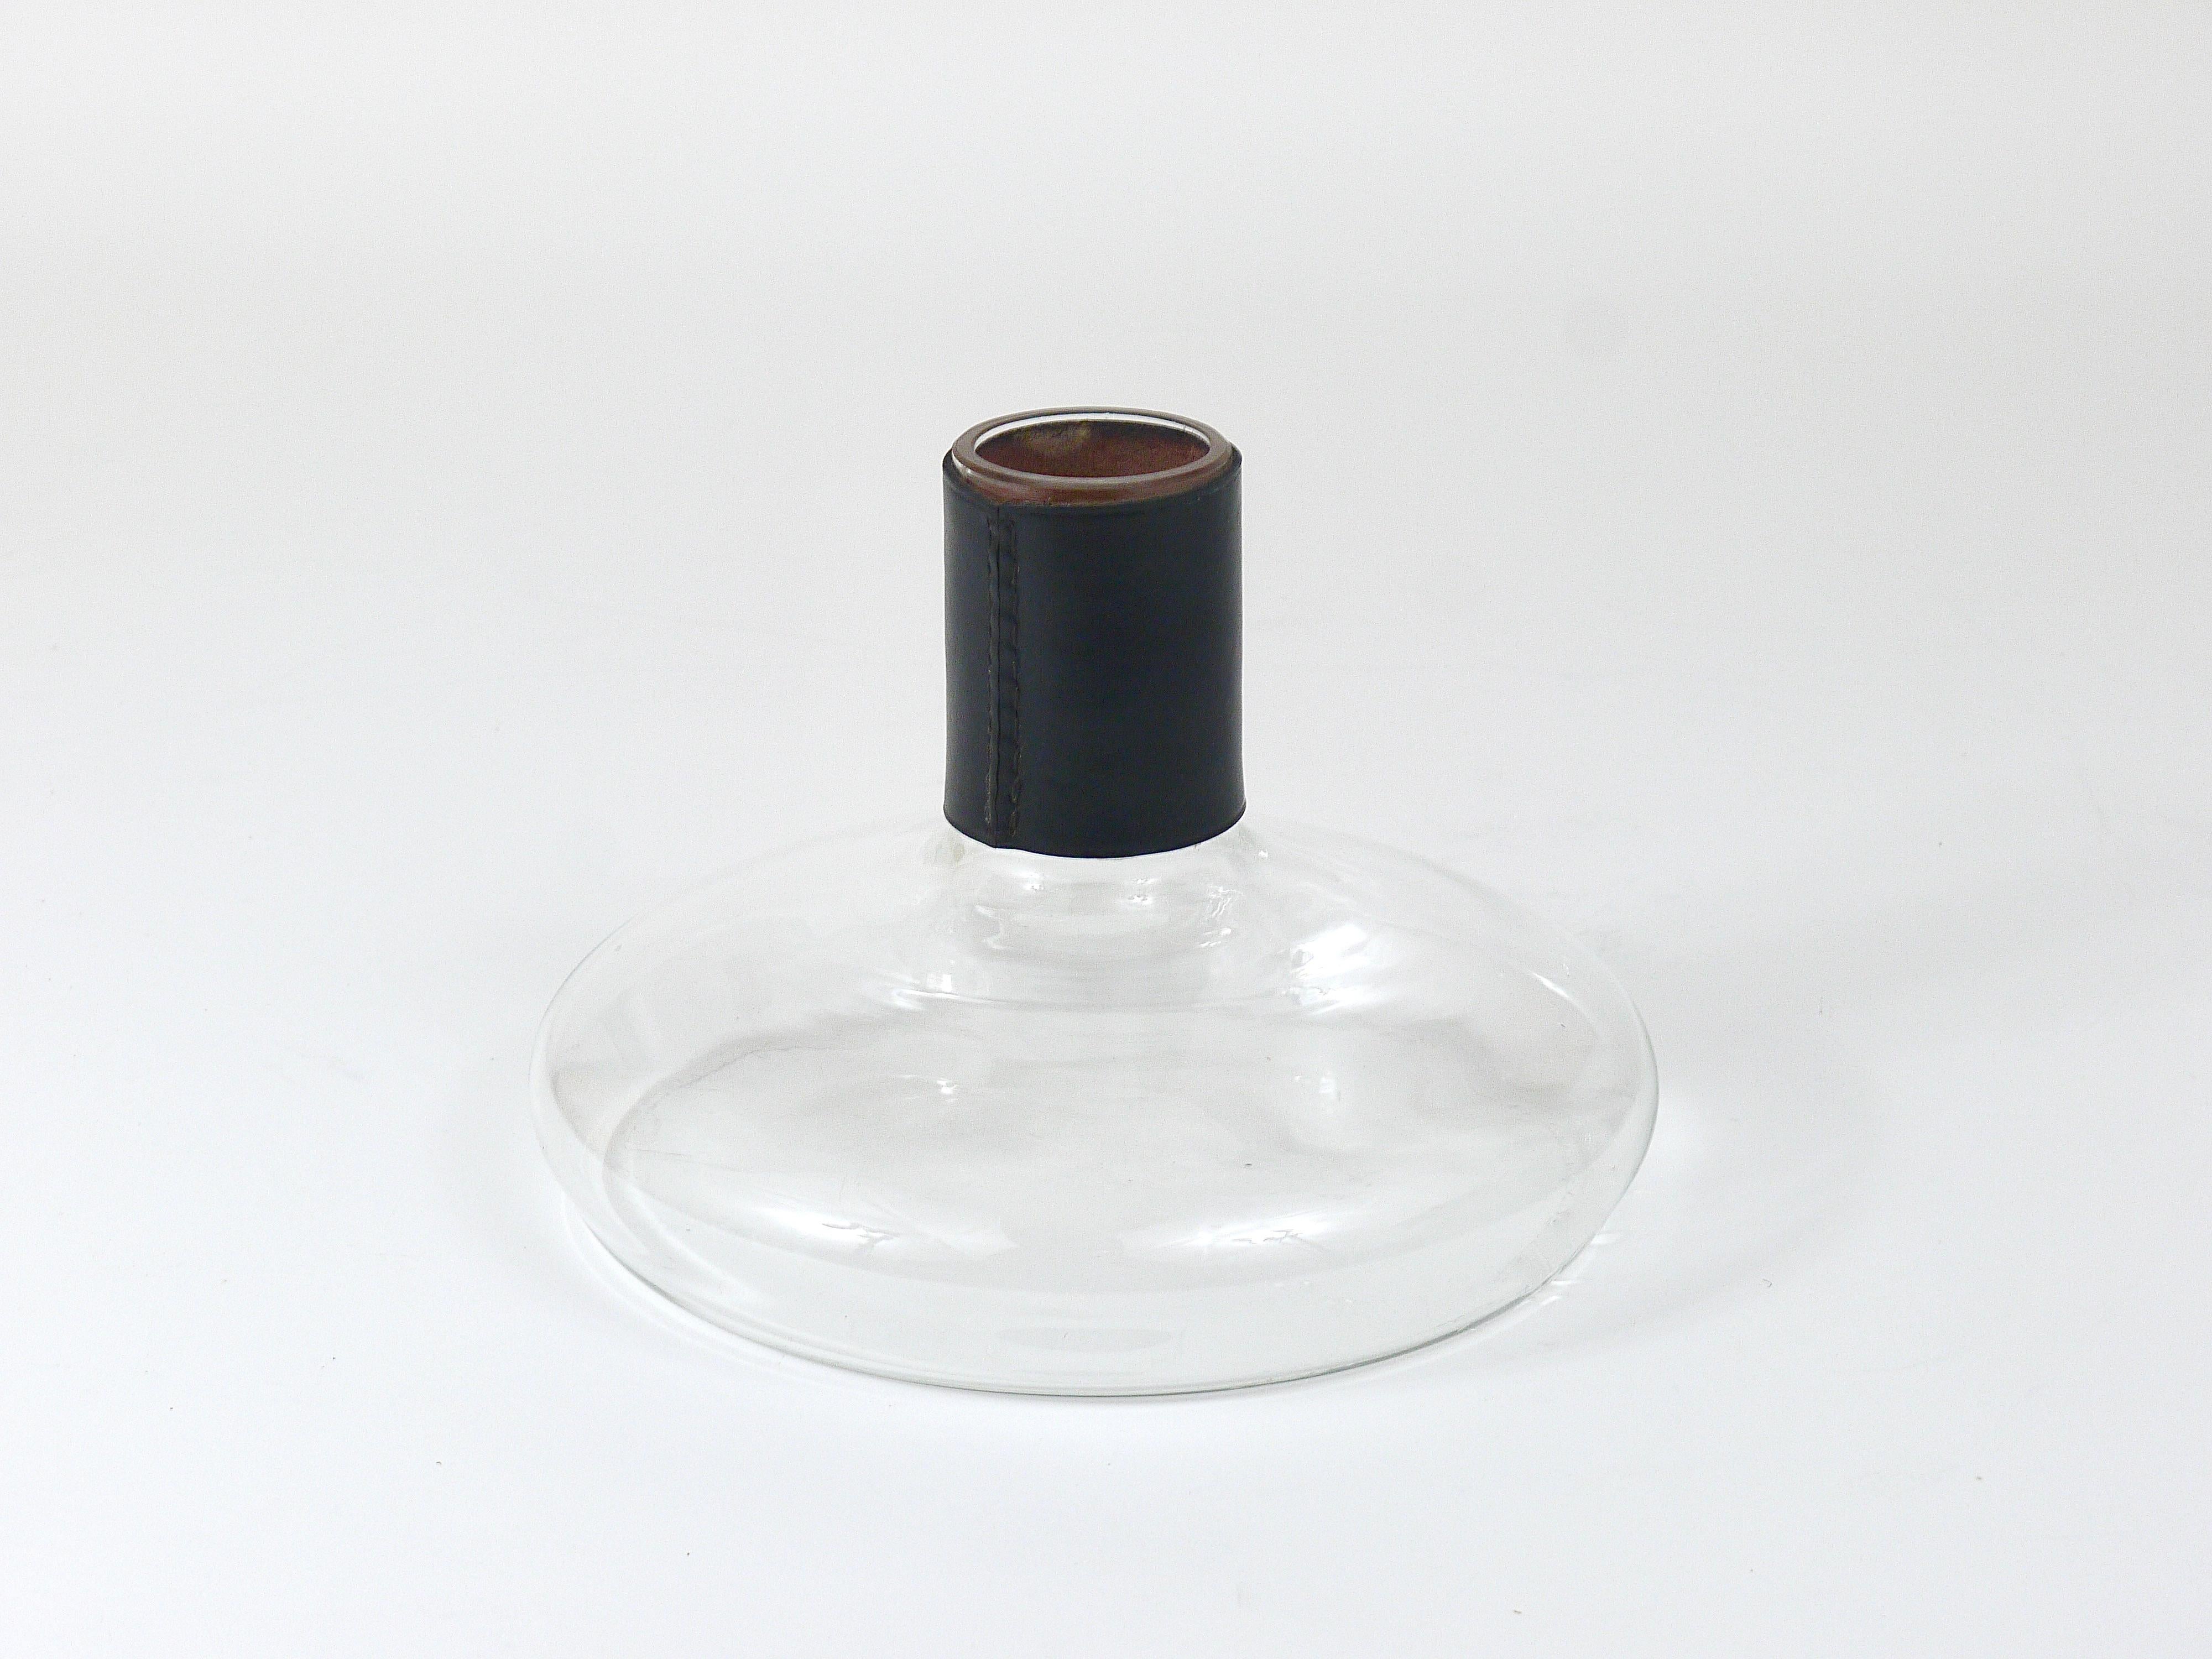 Carl Aubock Vase or Decanter with Black Leather Top, Midcentury, Austria, 1950s For Sale 2